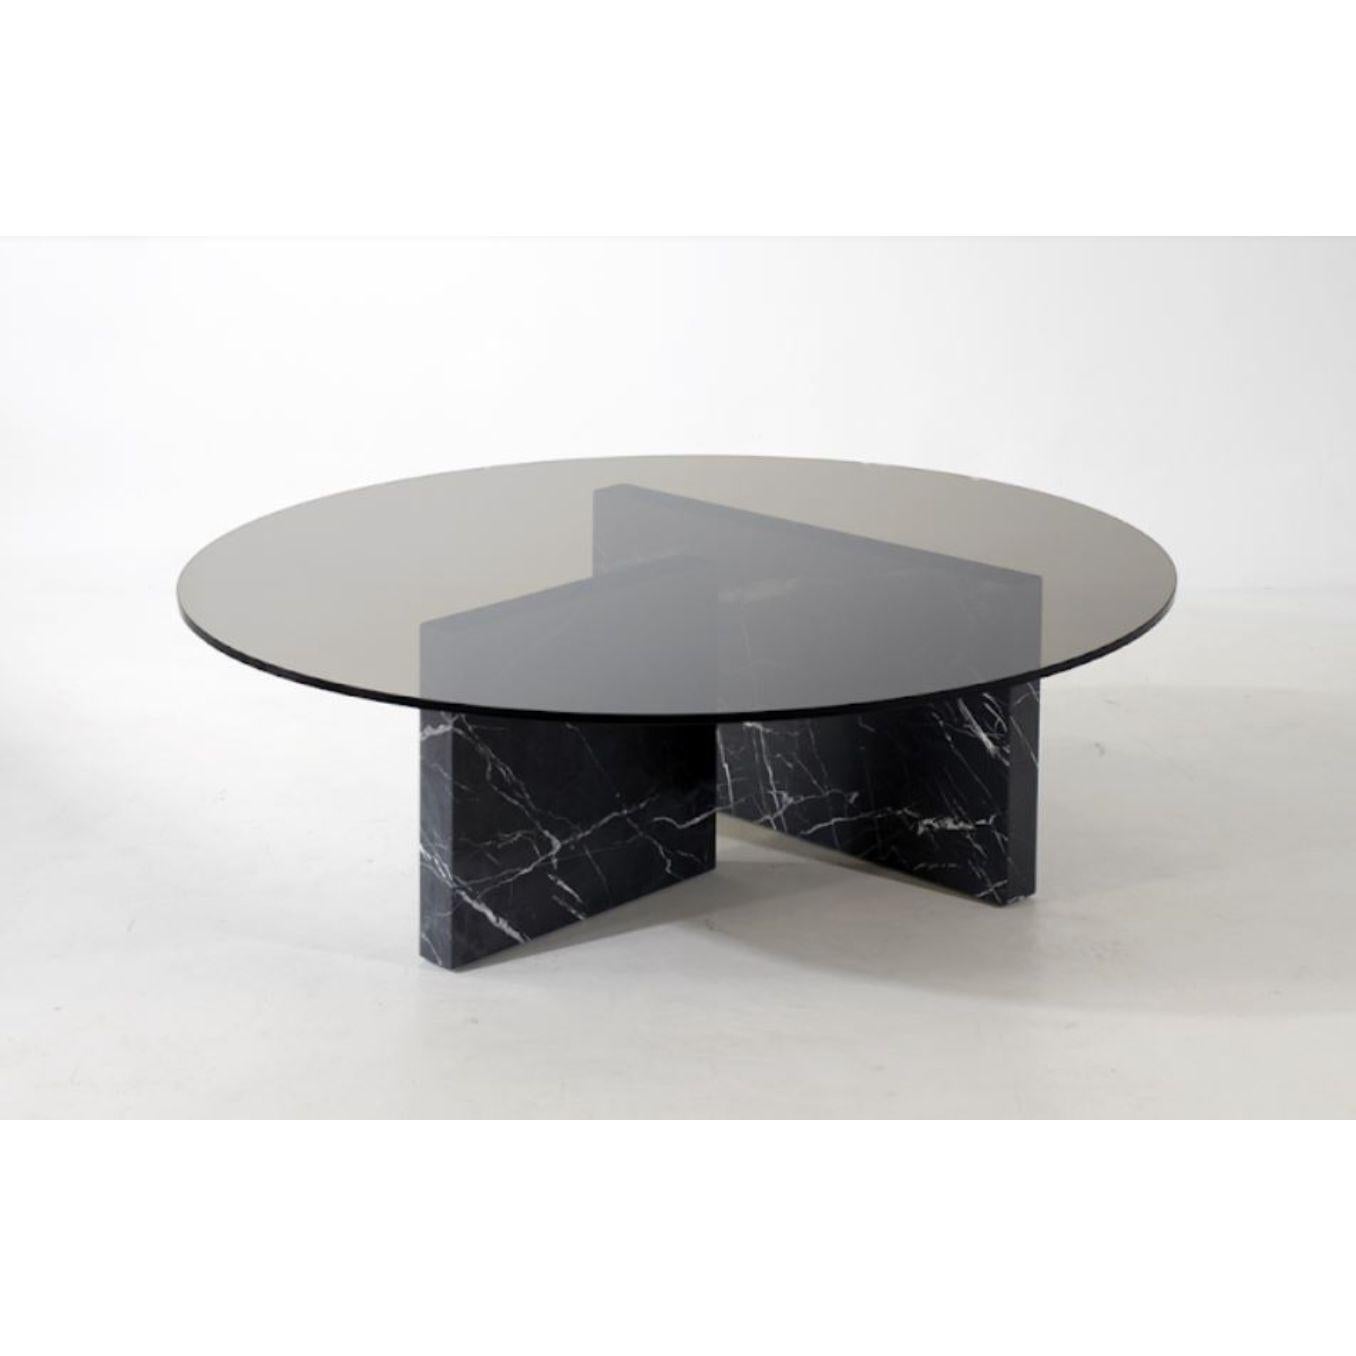 Remerber me round coffee table by Claste 
Dimensions: D 100 x W 35.5 x H 35.5 cm
Material: Carrara Gioia, Belvedere Black, Mont Blanc, Manhatten Calacatta, Fusion Marble, Temptation Marble, Blue Mare 
Weight: 55 kg

Since 2017 Quinlan Osborne